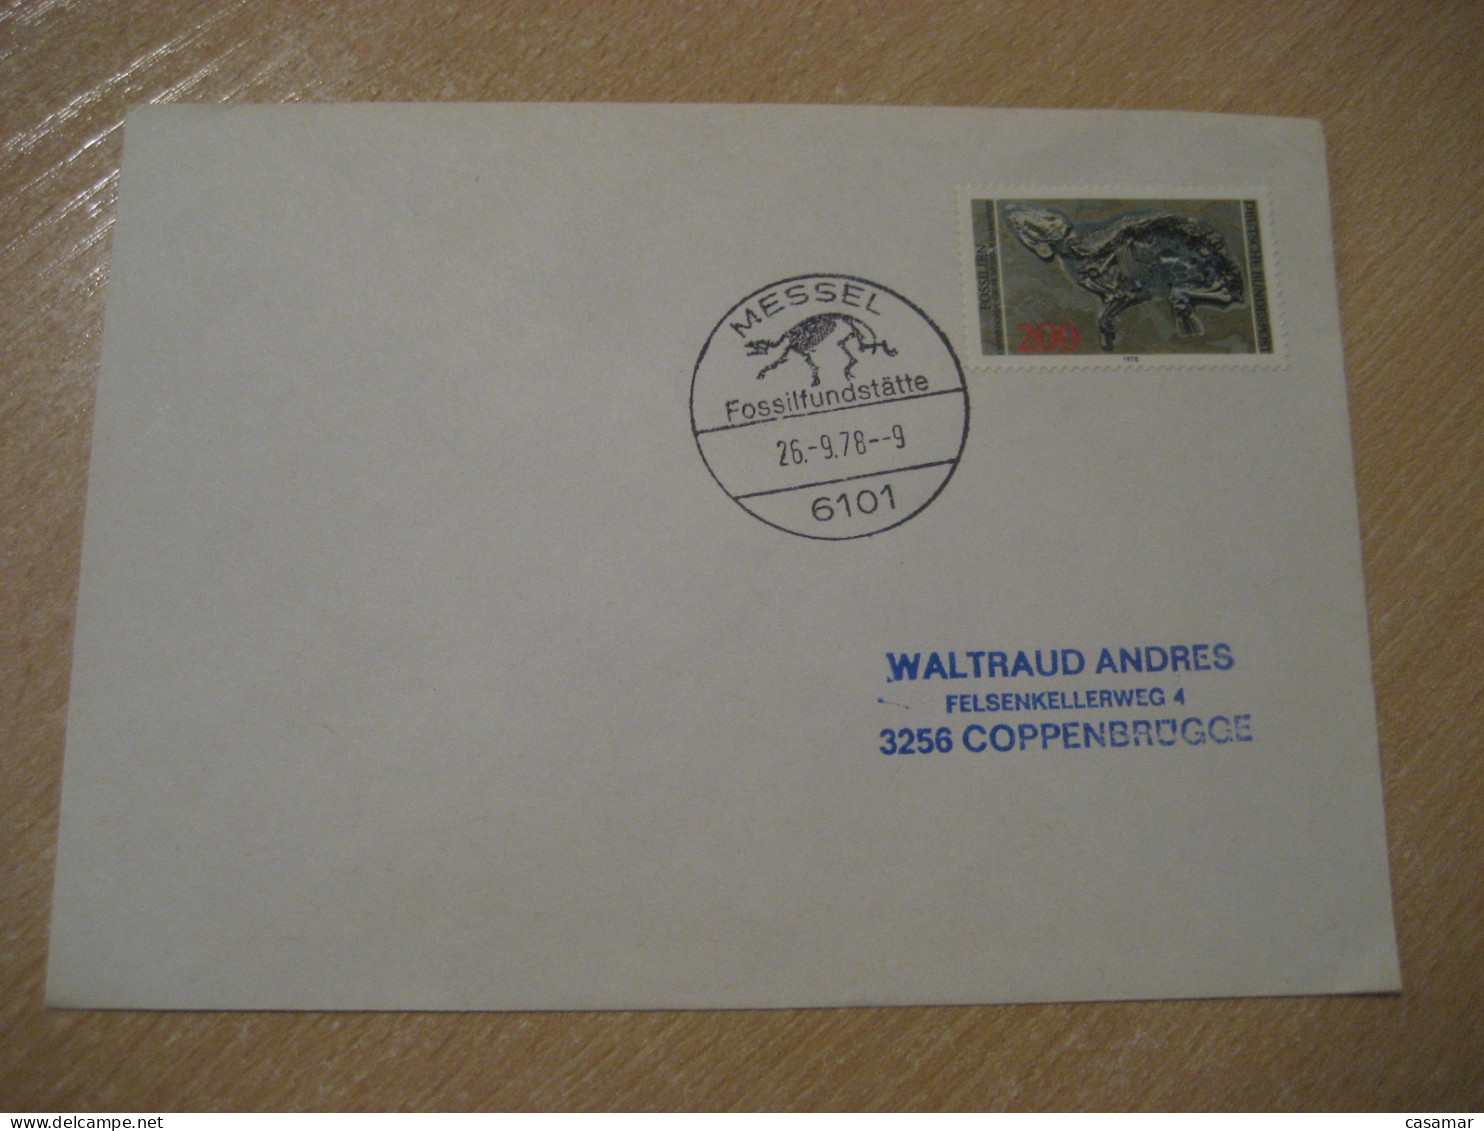 MESSEL 1978 Fossil Deposit Urpferdchen Cancel Cover GERMANY Fossil Fossils Animals Fossiles Geology Geologie - Fossili